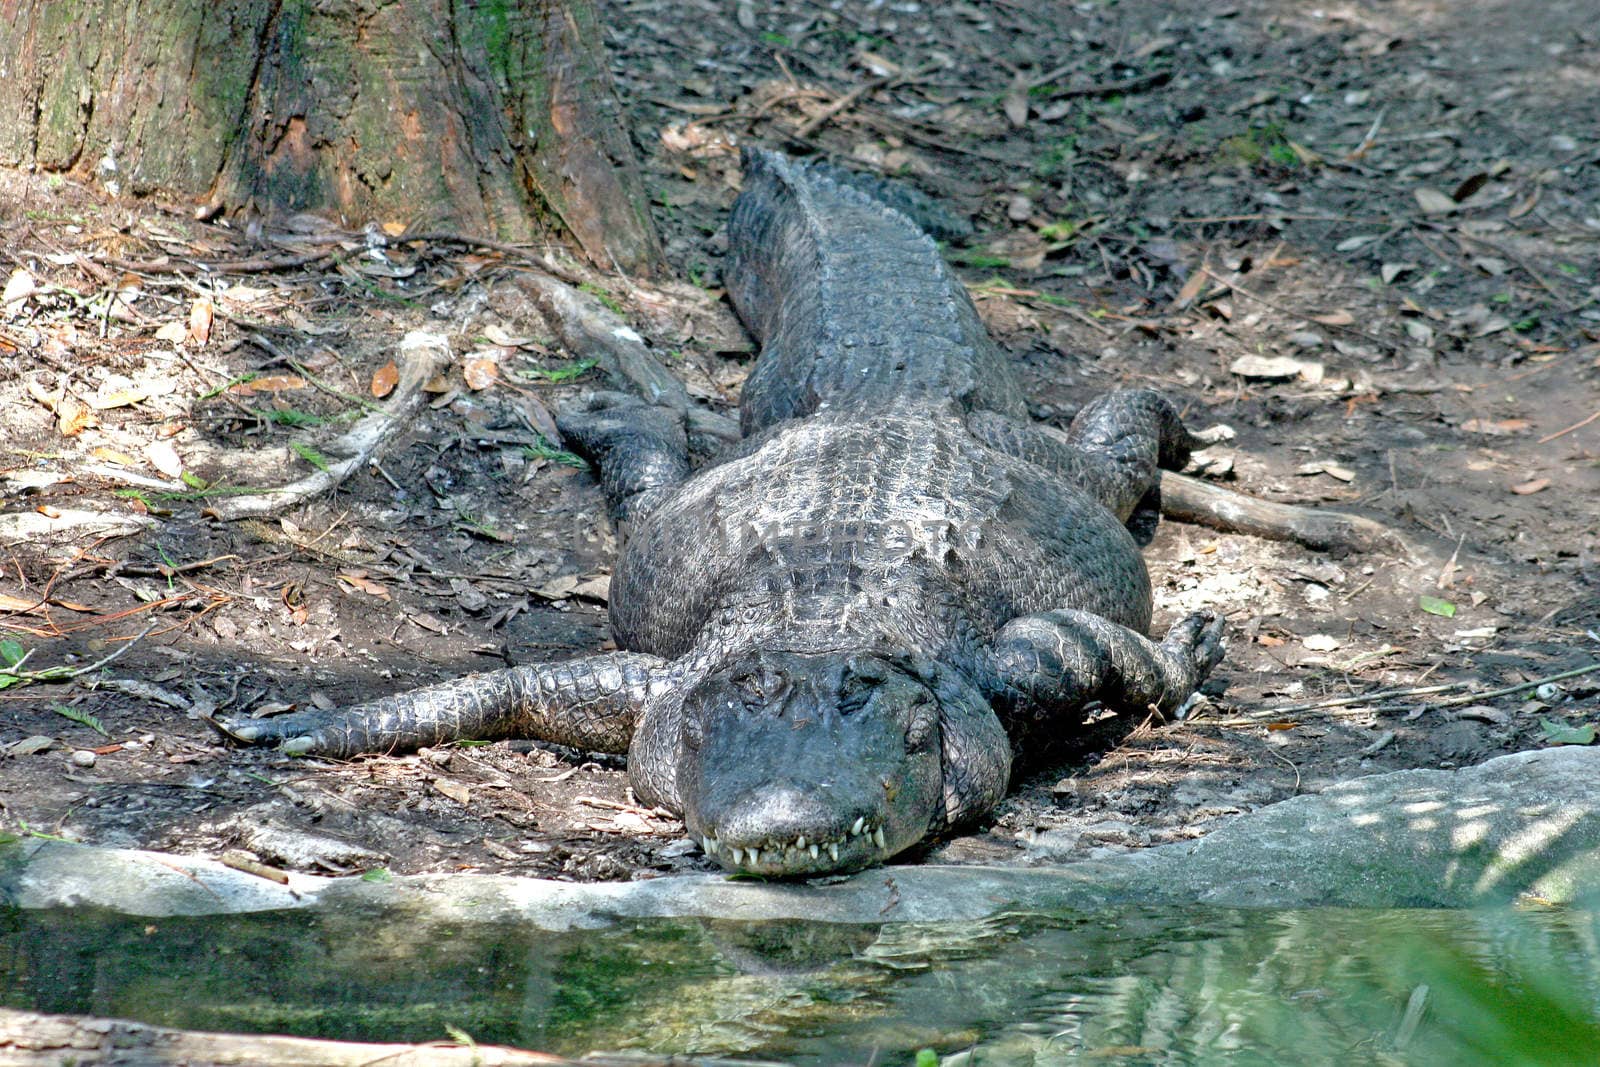 A large alligator sitting on the bank